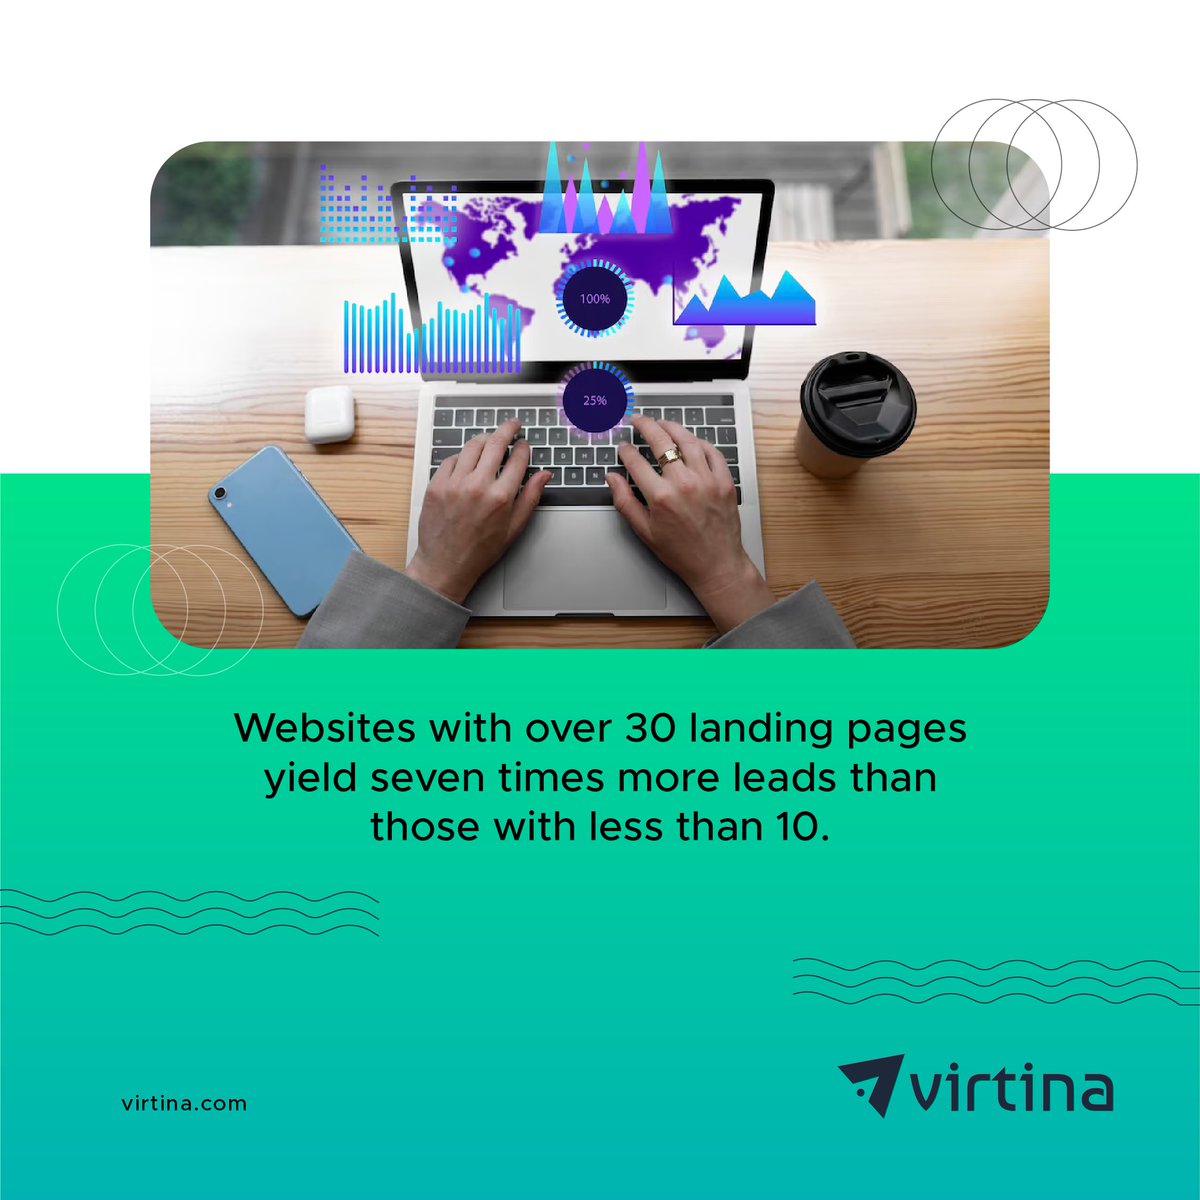 Maximize lead generation with landing pages! 📈✨ Websites with 30+ landing pages generate 7x more leads. Create targeted pages for conversions and capture valuable leads. Elevate your online success with this strategy. #LeadGen #LandingPages #ConversionOptimization